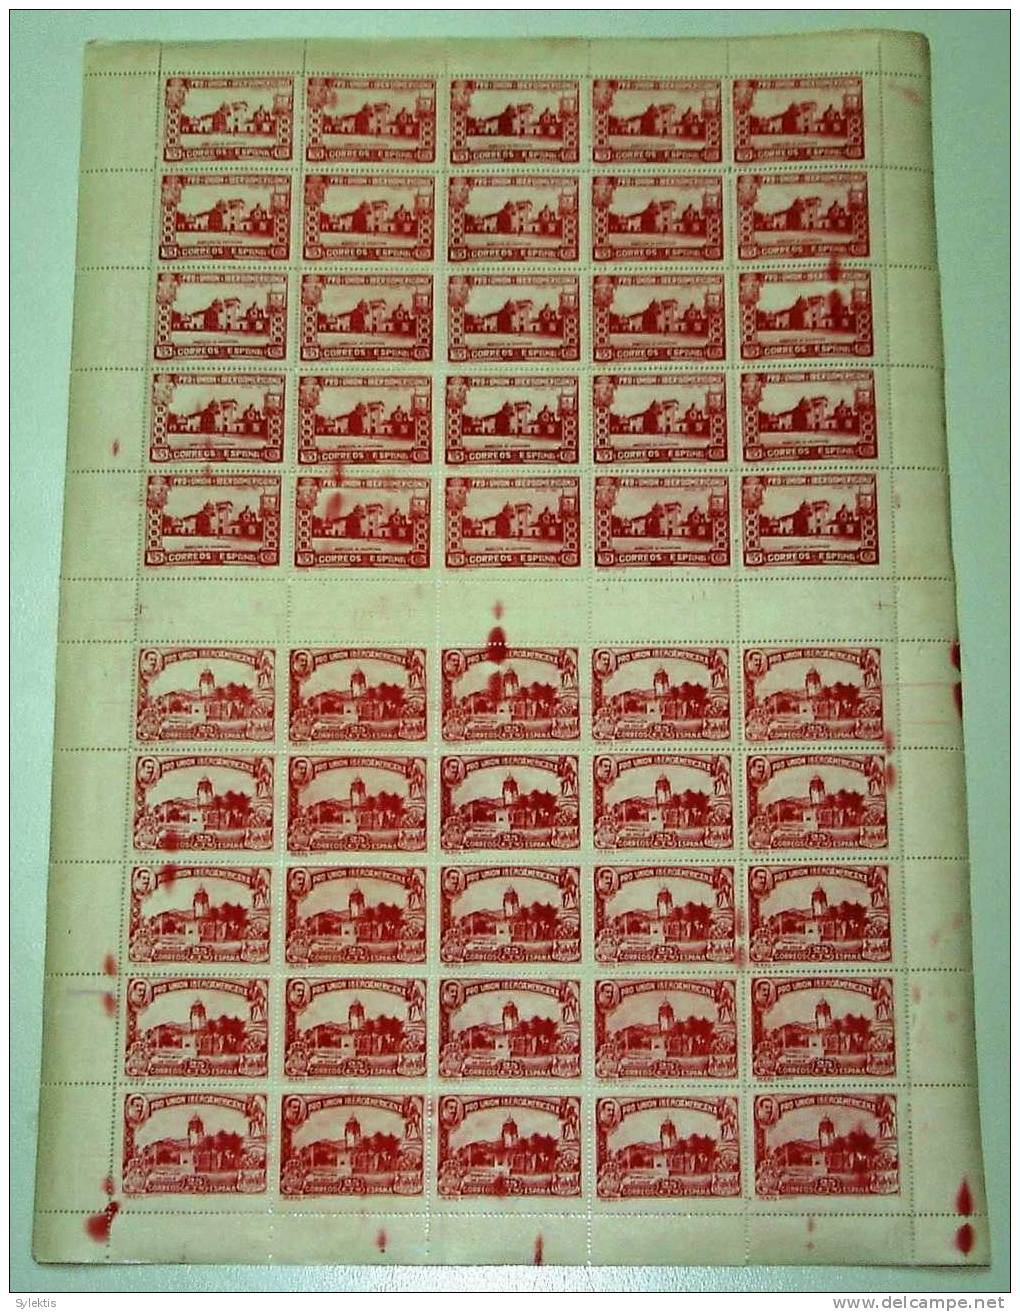 SPAIN 1930 25c FULL SHEET OF 50 STAMPS MH-MNH - Nuevos